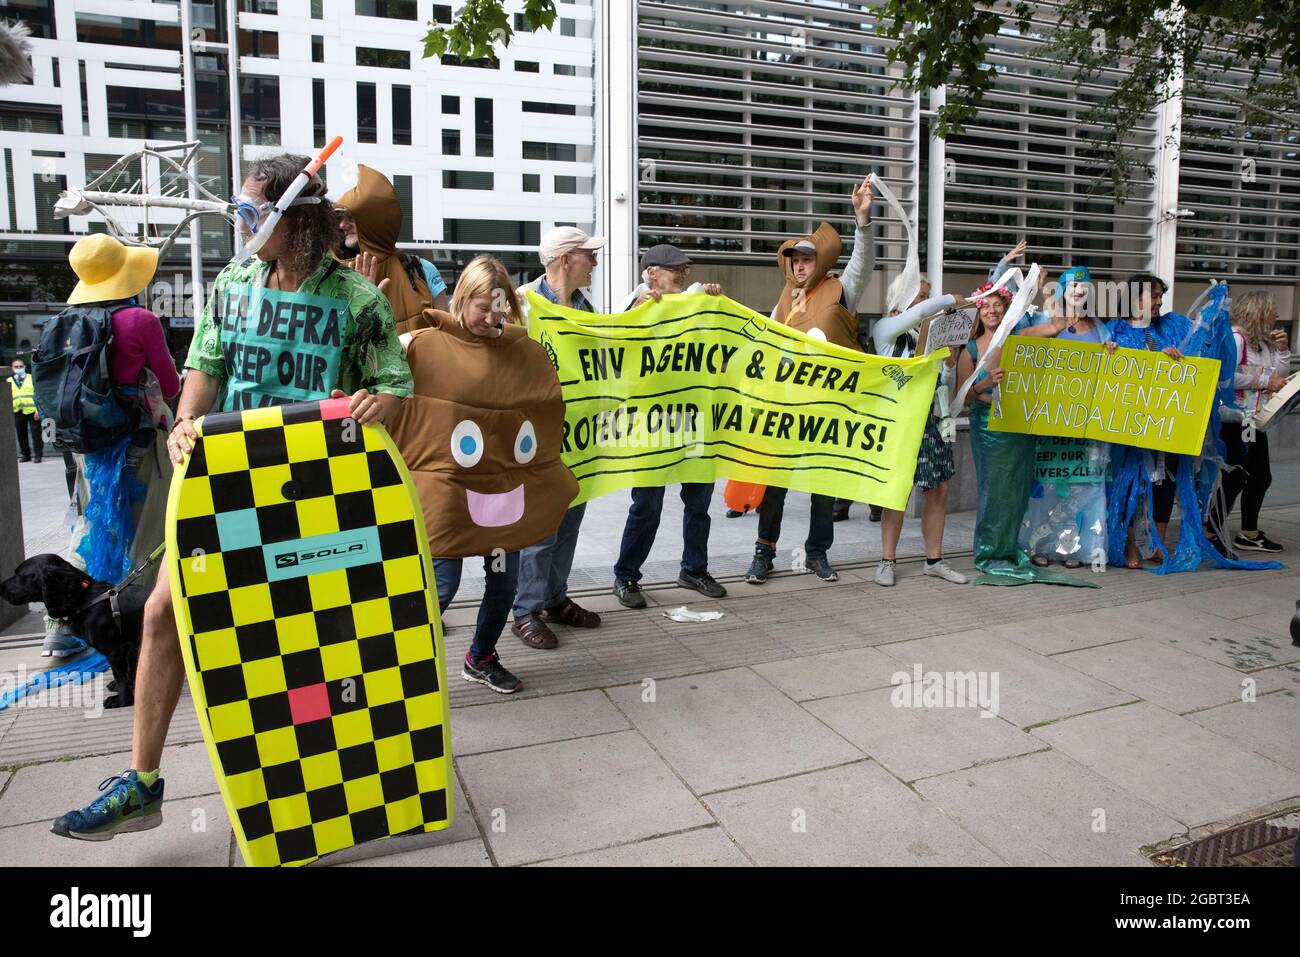 London, UK. 5th Aug, 2021. Members of Extinction Rebellion protest outside the Home Office and DEFRA. Members of Open water swimming and Angling groups protest against pollution in waterways.They want more action against global warming and the pollution of the rivers. Credit: Mark Thomas/Alamy Live News Stock Photo